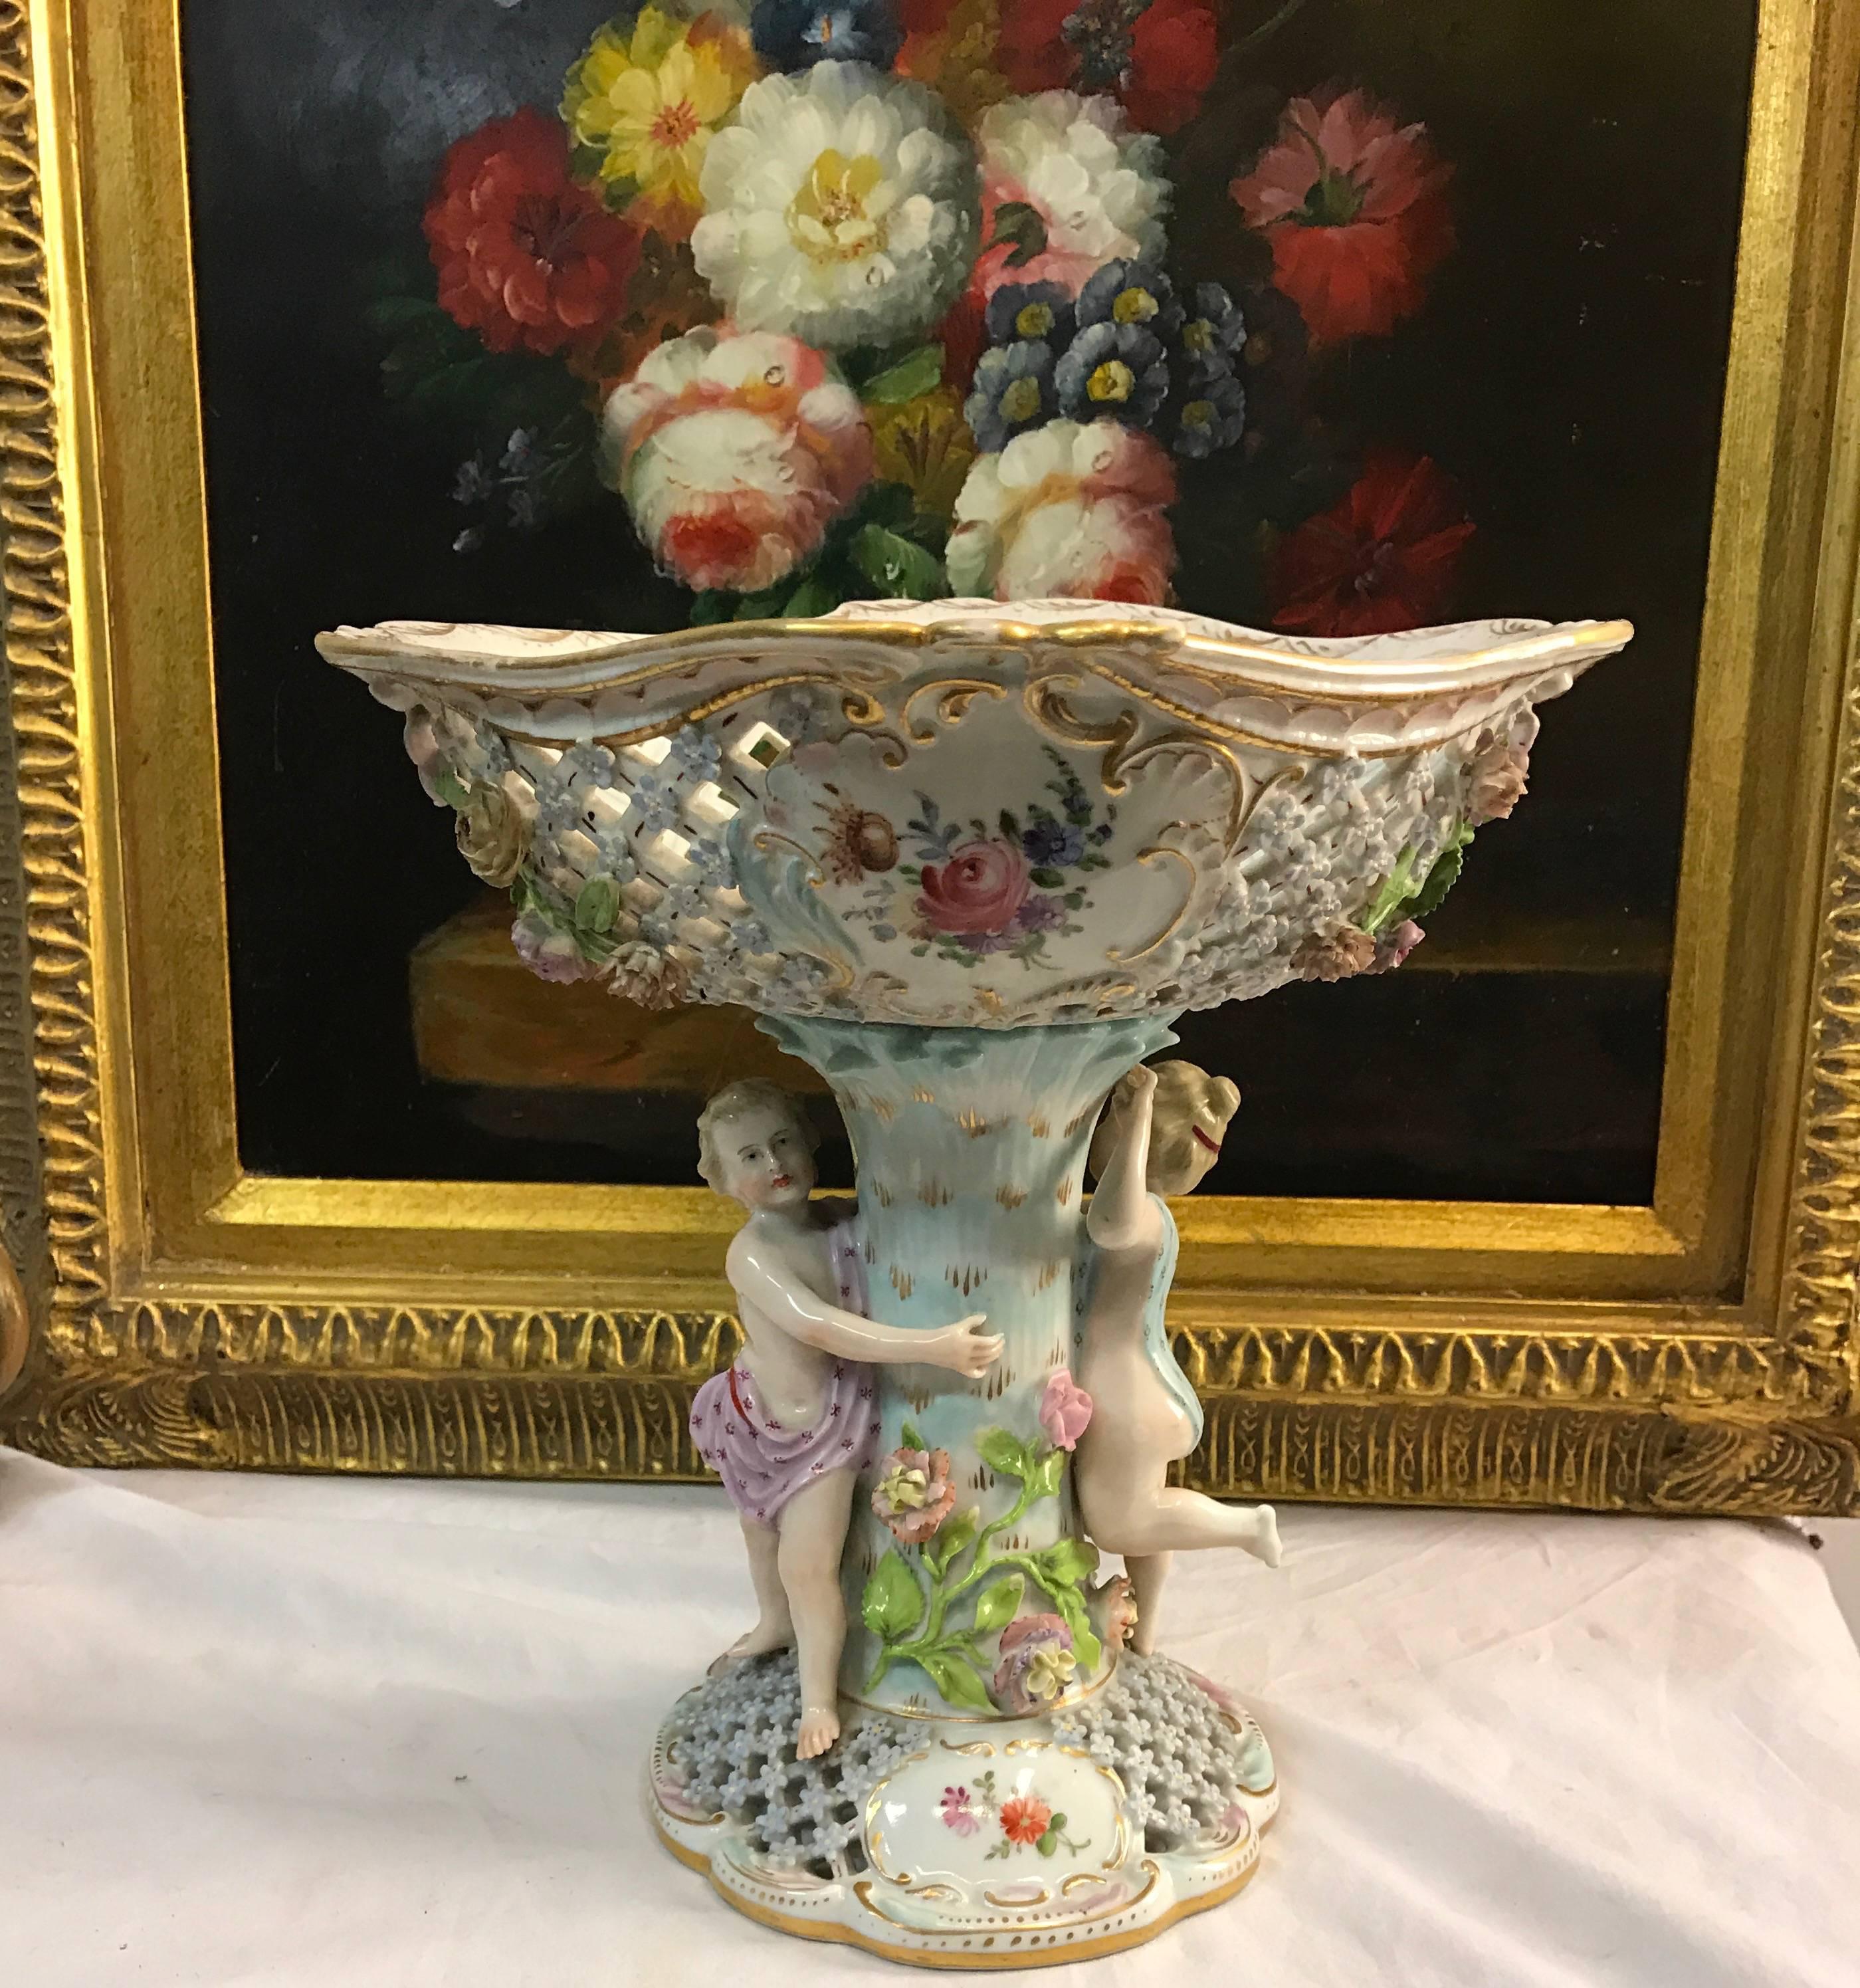 19th Century Baroque Porcelain Centerpiece, Bowl by Carl Thieme at Potschappel In Good Condition For Sale In Lisse, NL